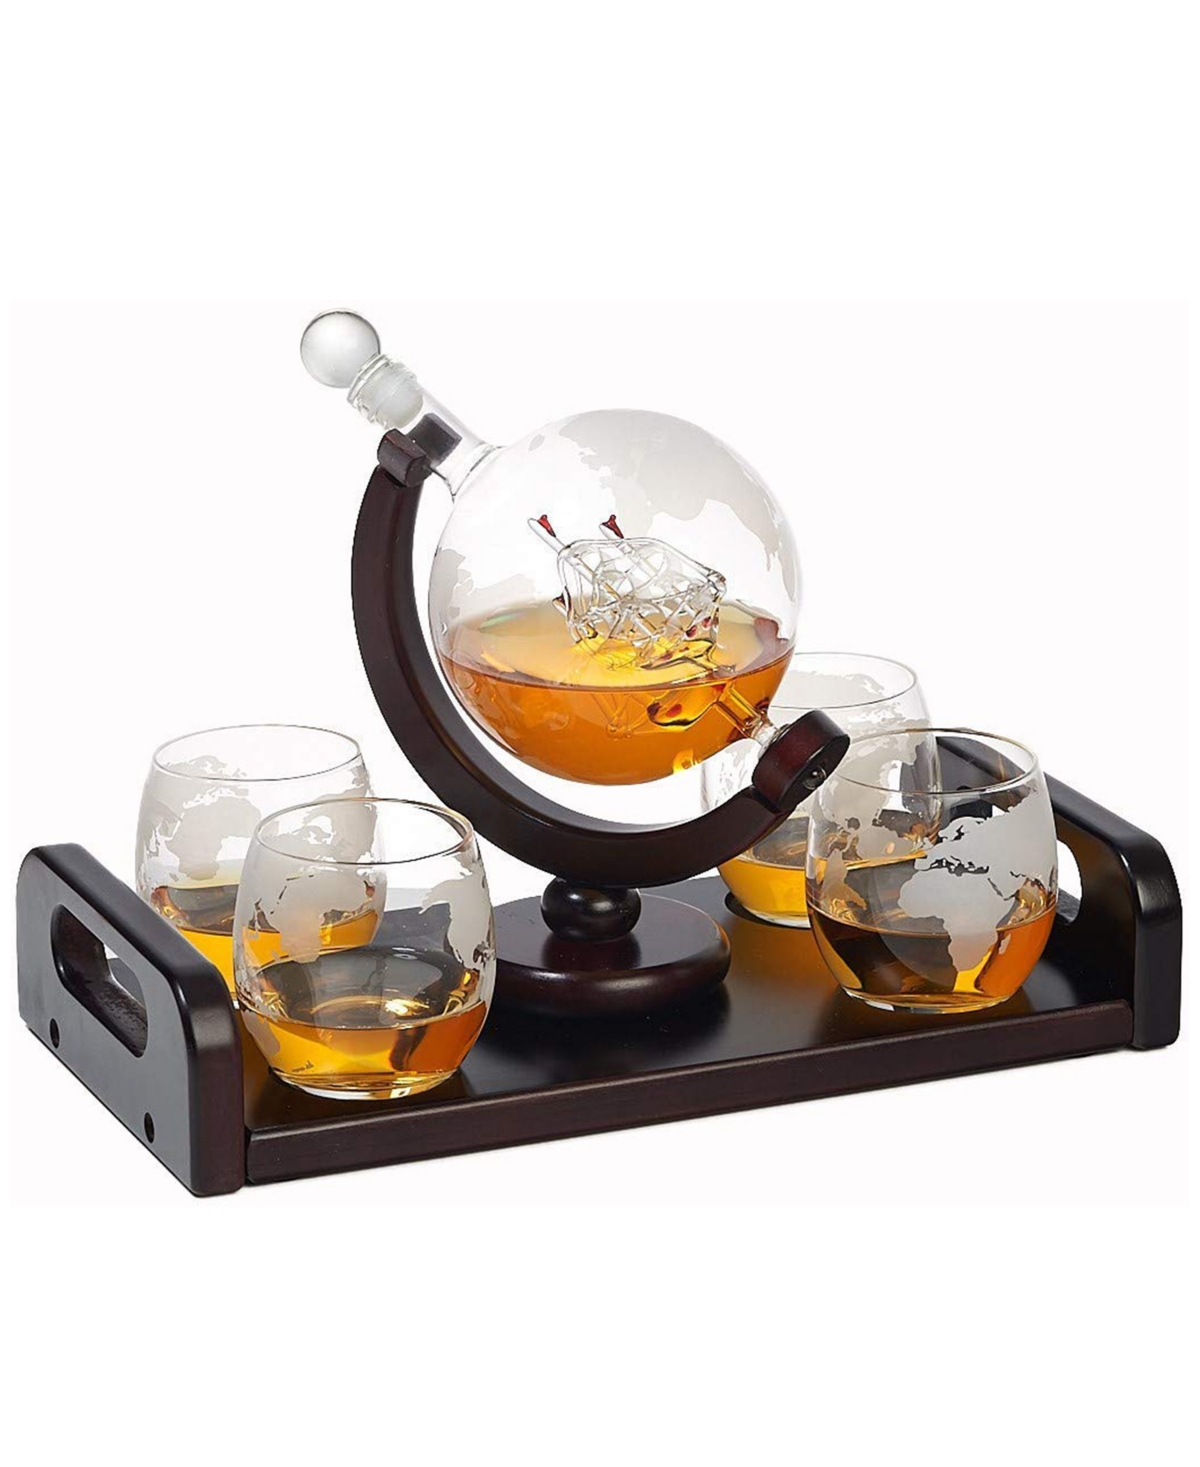 Bezrat Globe Whisky Decanter Gift Set With Glasses And Tray, 6 Pieces In Clear